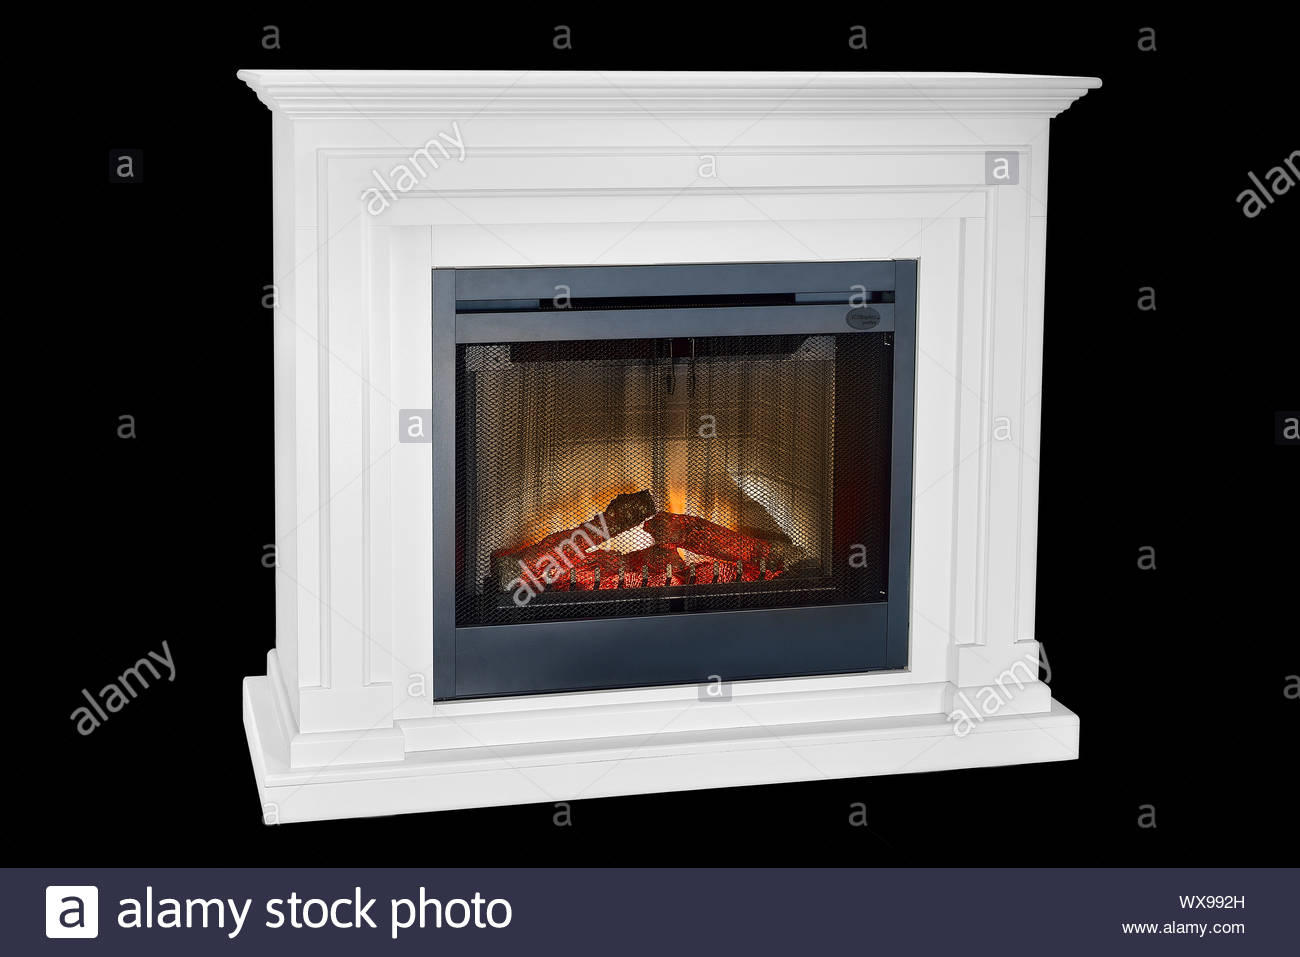 Stone Fireplace with Wood Mantel Best Of Fireplace Home Black and White Stock S & Fireplace Home